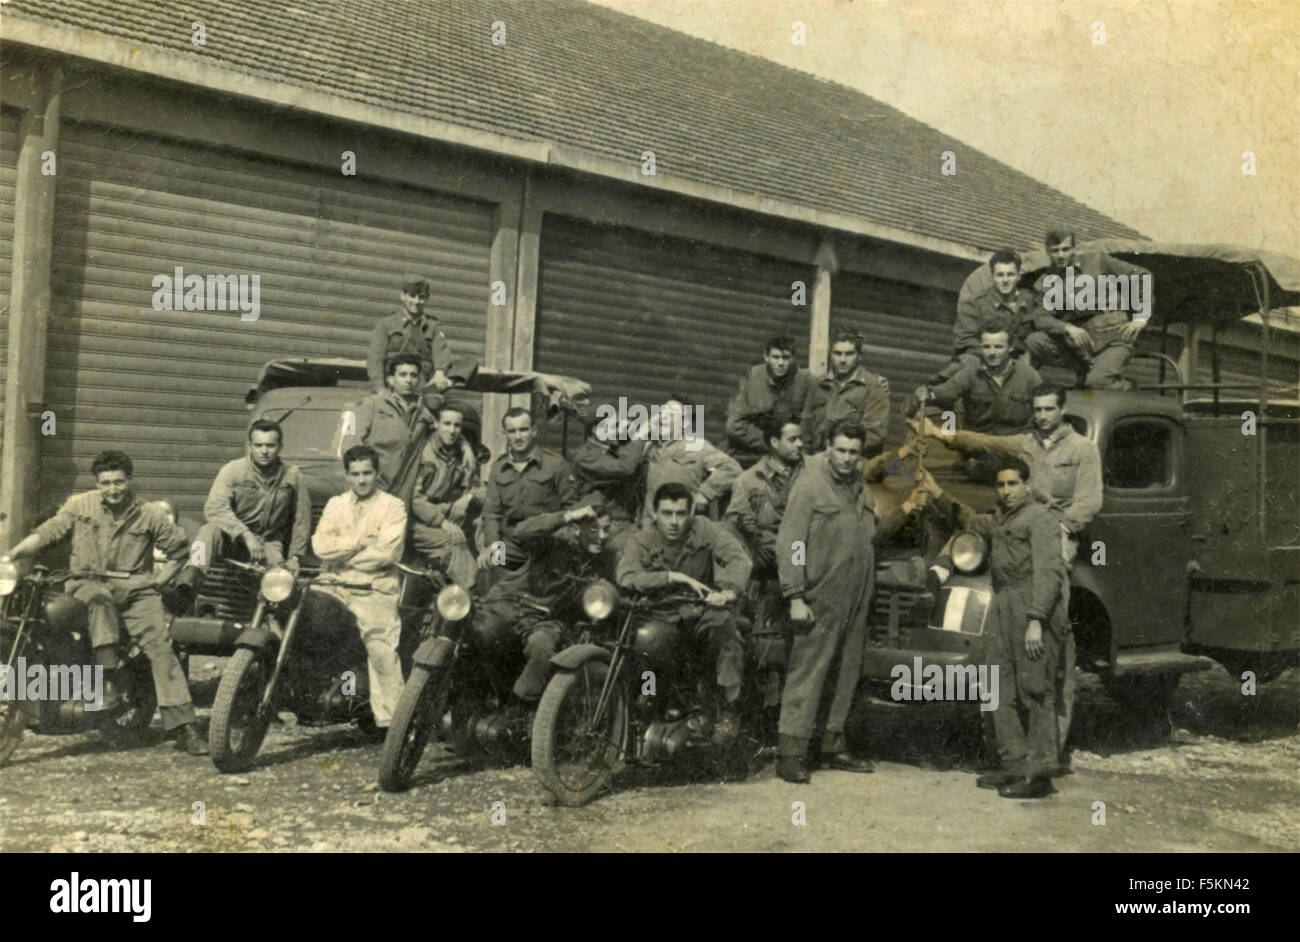 A group of soldiers of the Italian Army with motorcycles and trucks Stock Photo